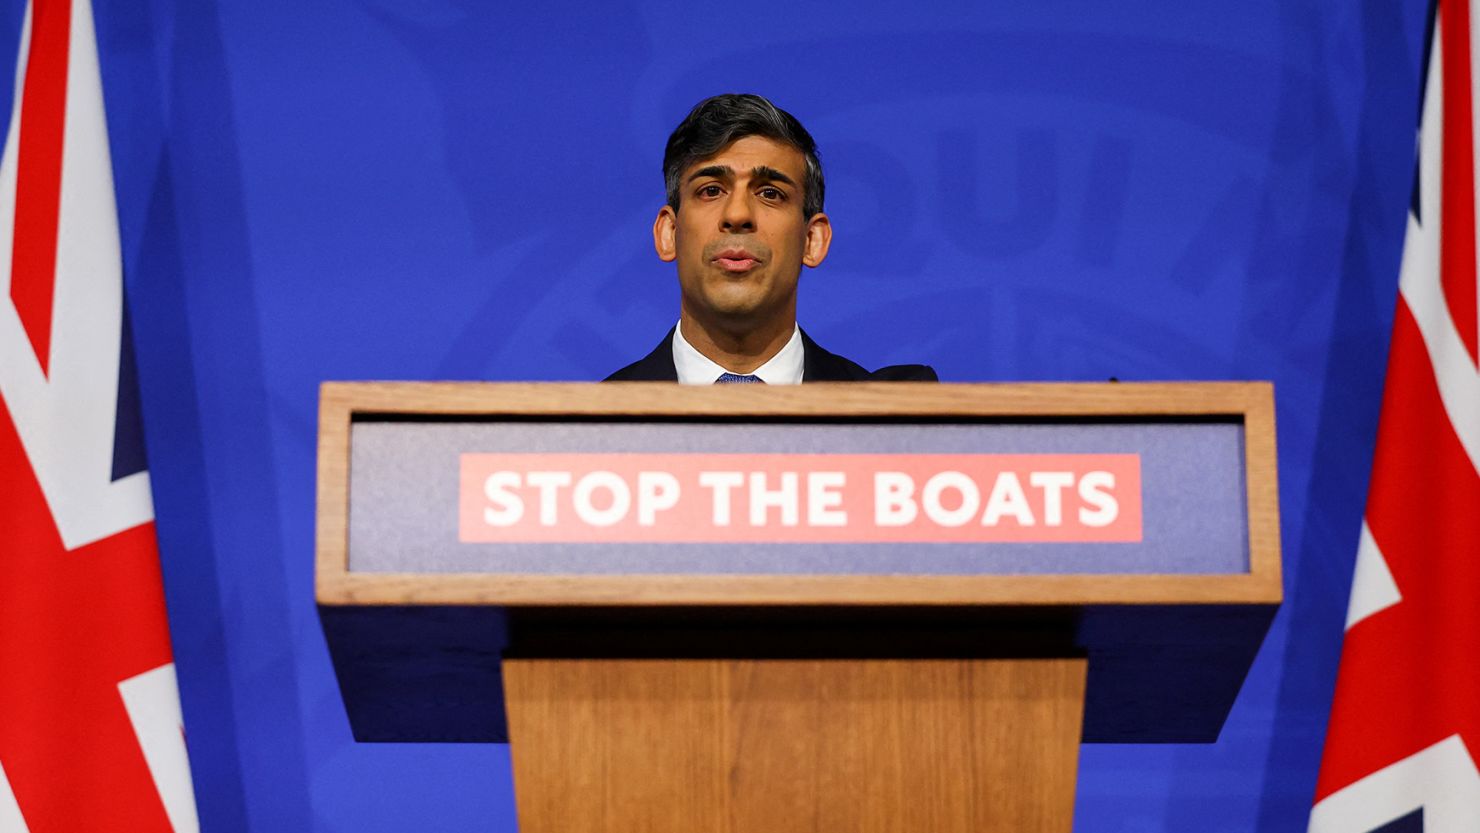 Rishi Sunak hopes that finally implementing his controversial policy of sending asylum seekers to Rwanda could turn his electoral fortunes around, though there was no such sign in the local election results